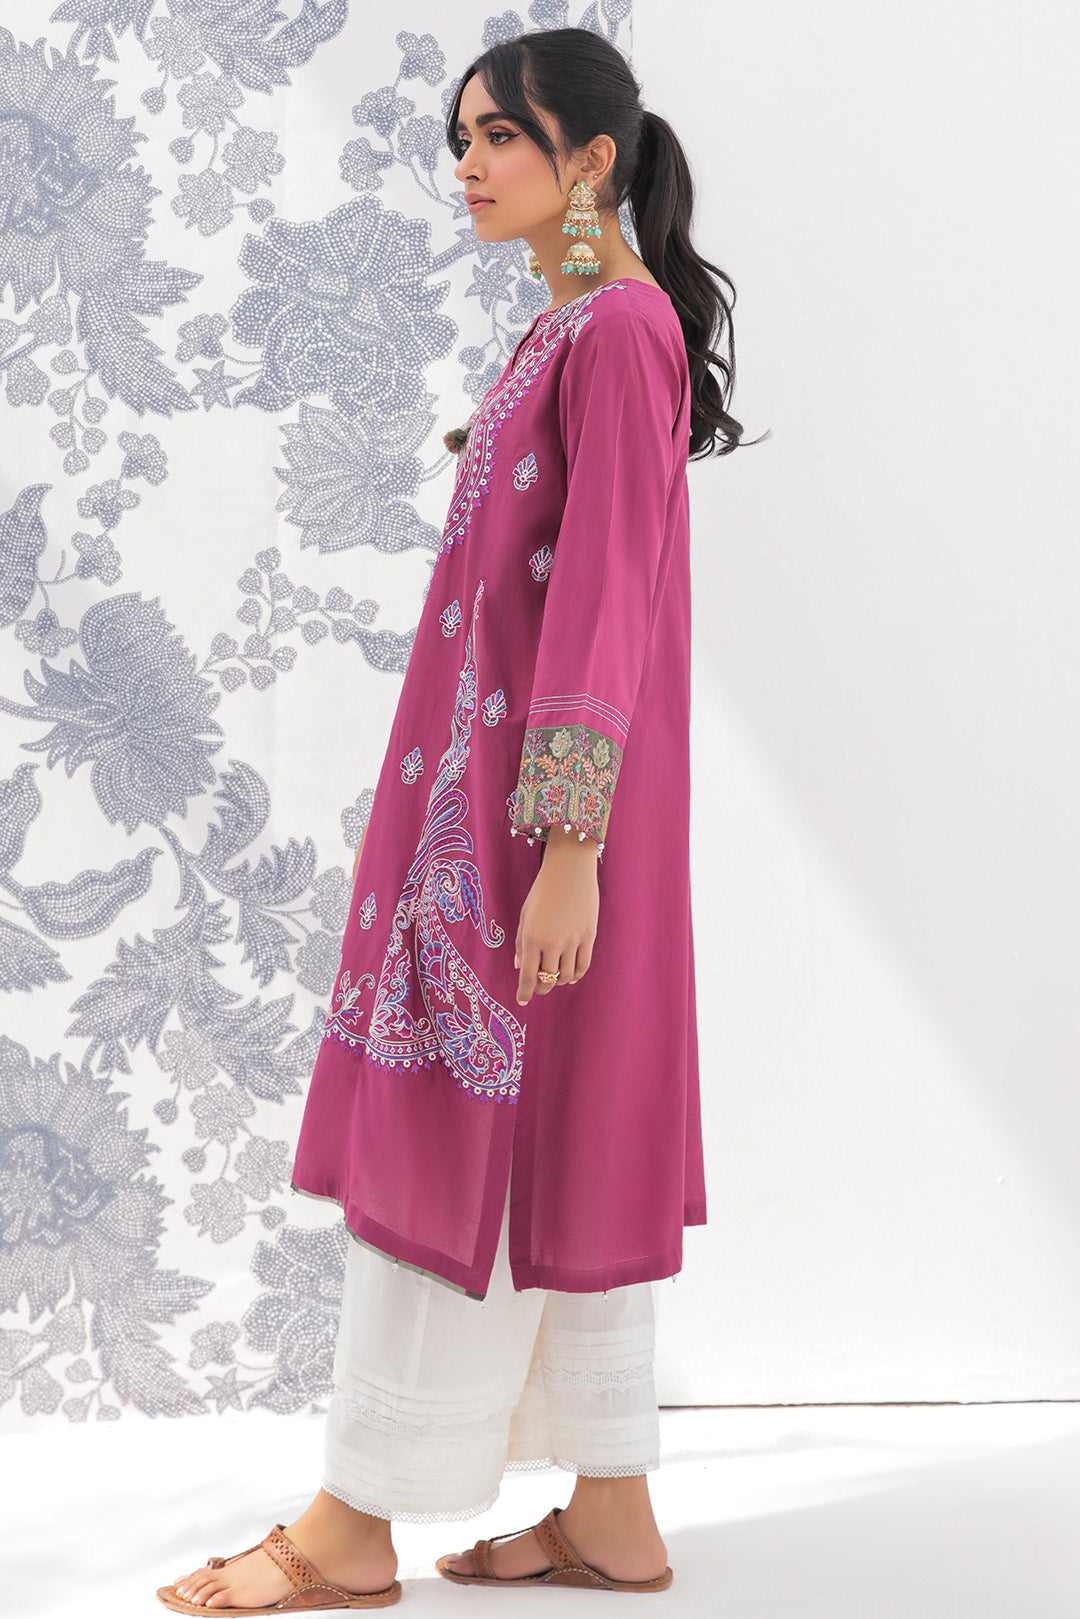 1 Piece - Dyed Embroidered Lawn Shirt P0472 (SO)